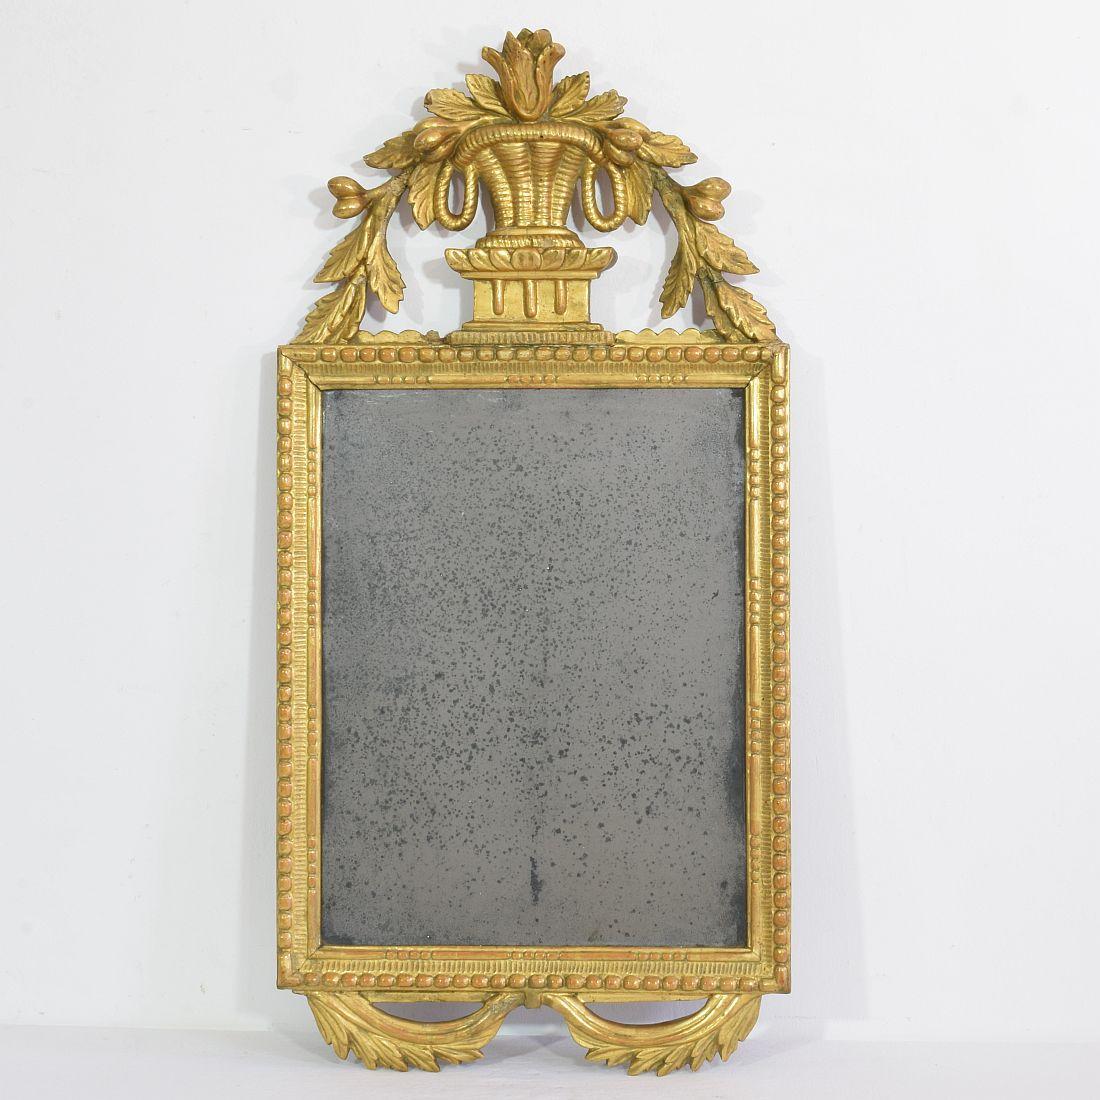 Wonderful Italian carved giltwood Louis XVI mirror, with its beautiful foxed old mercury mirror glass,
Italy, circa 1770-1790. Weathered, small losses and old repairs.